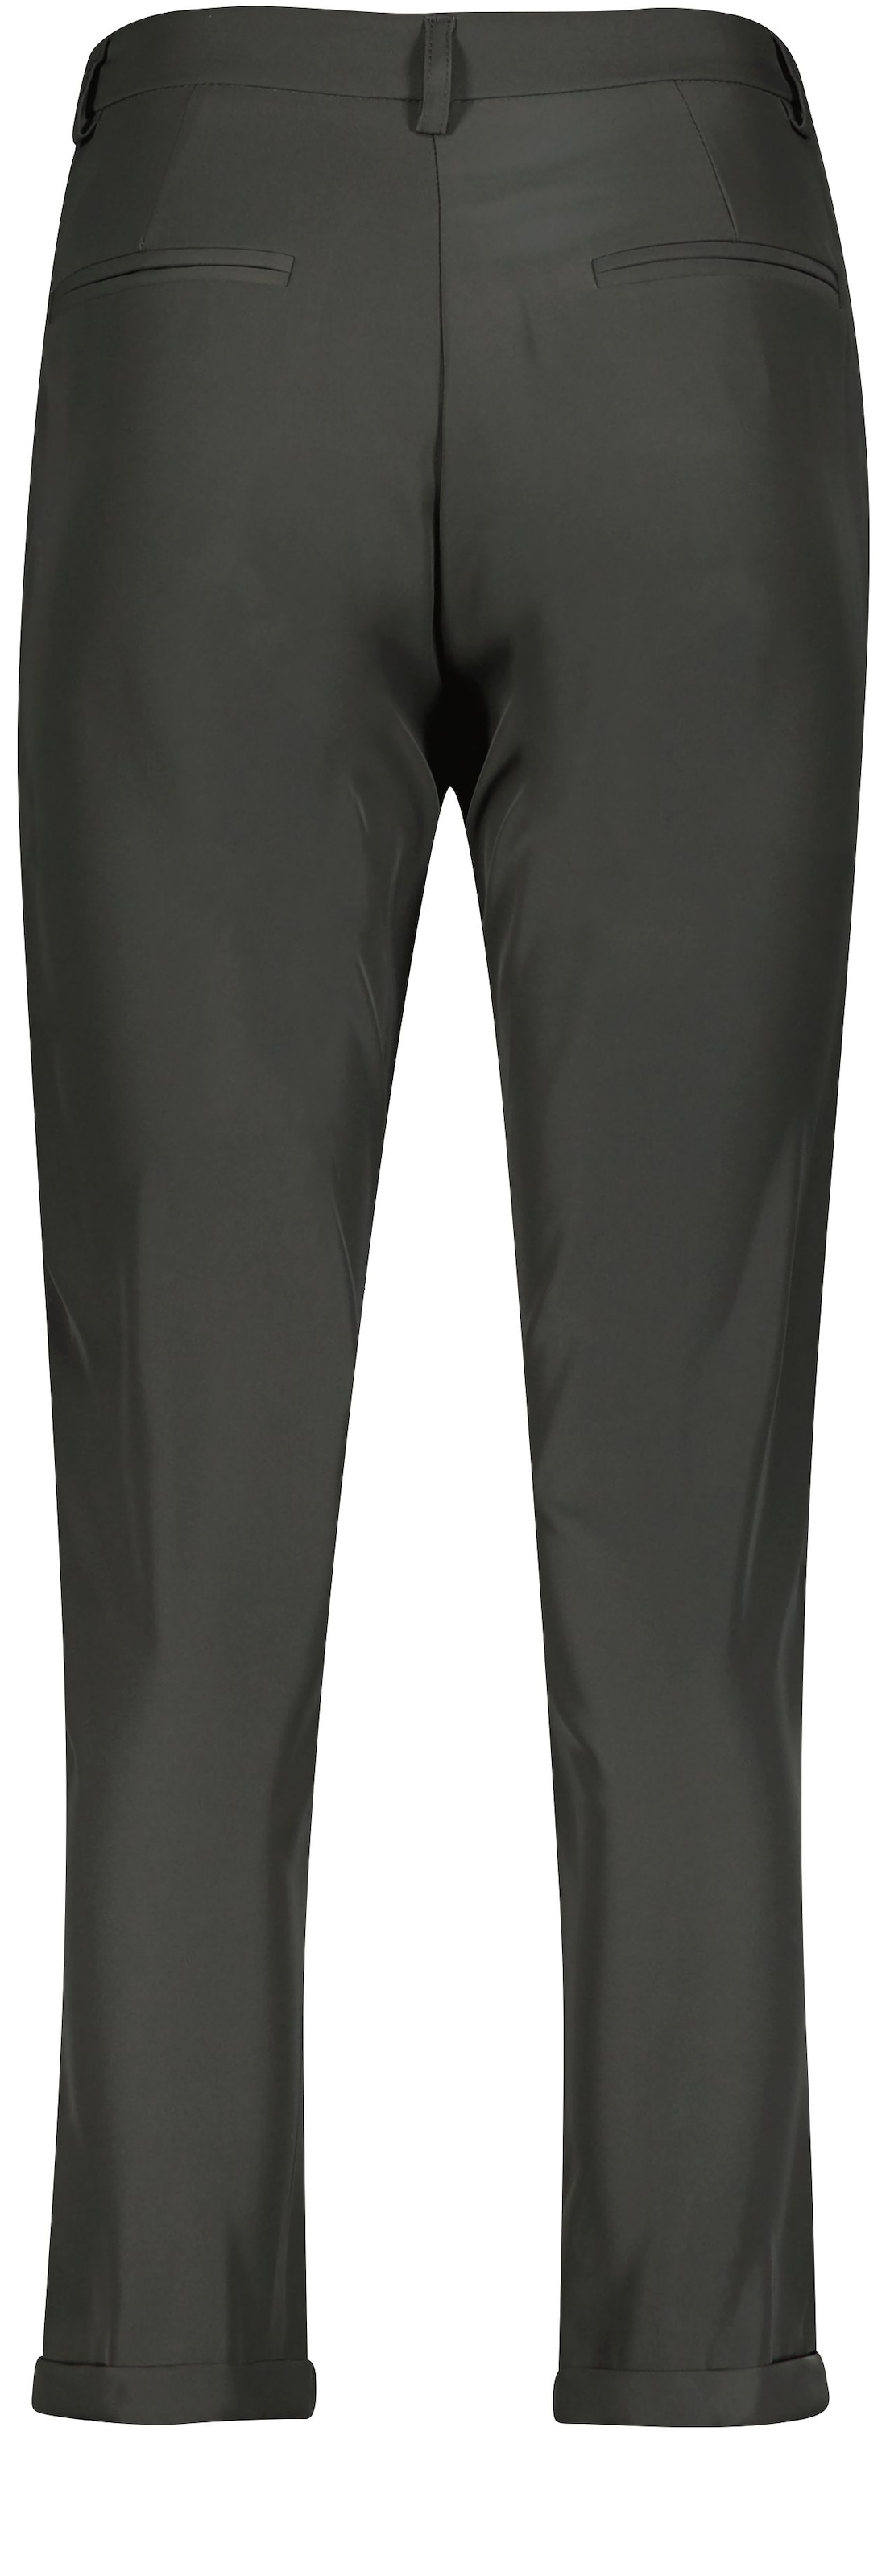 ♕ 7/8-Hose IMPERIAL bei